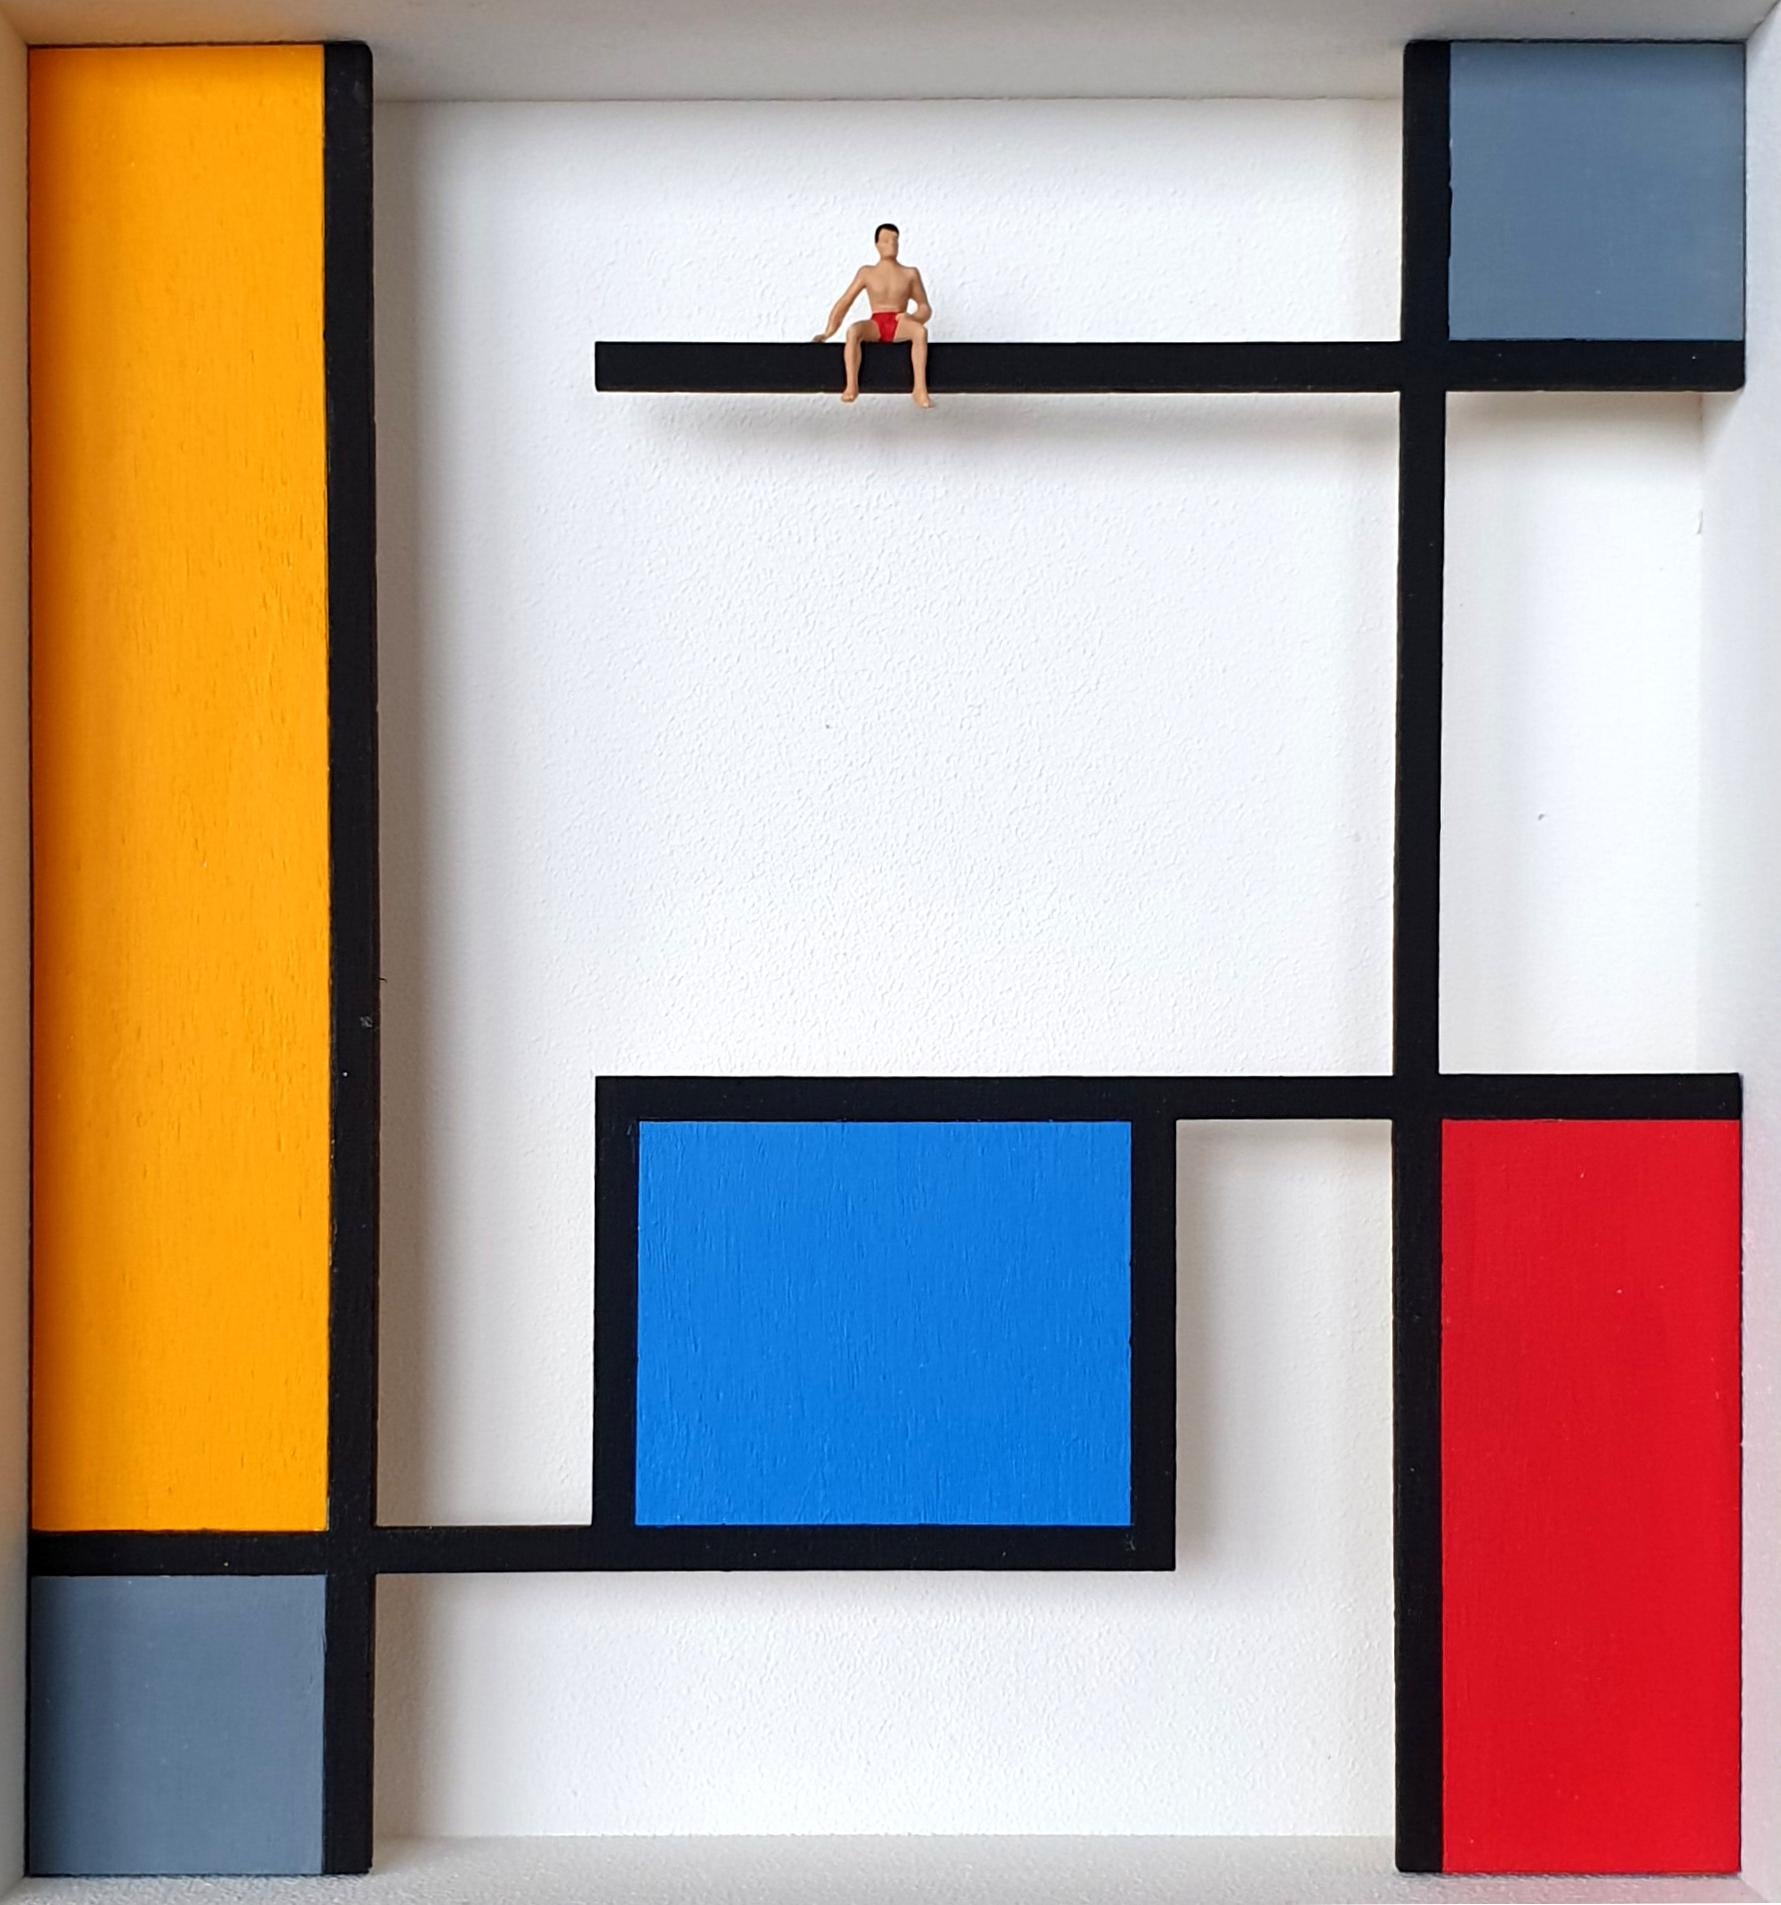 Homage to Mondrian -The Pool- contemporary art work, design tribute Dutch master - Mixed Media Art by Volker Kuhn